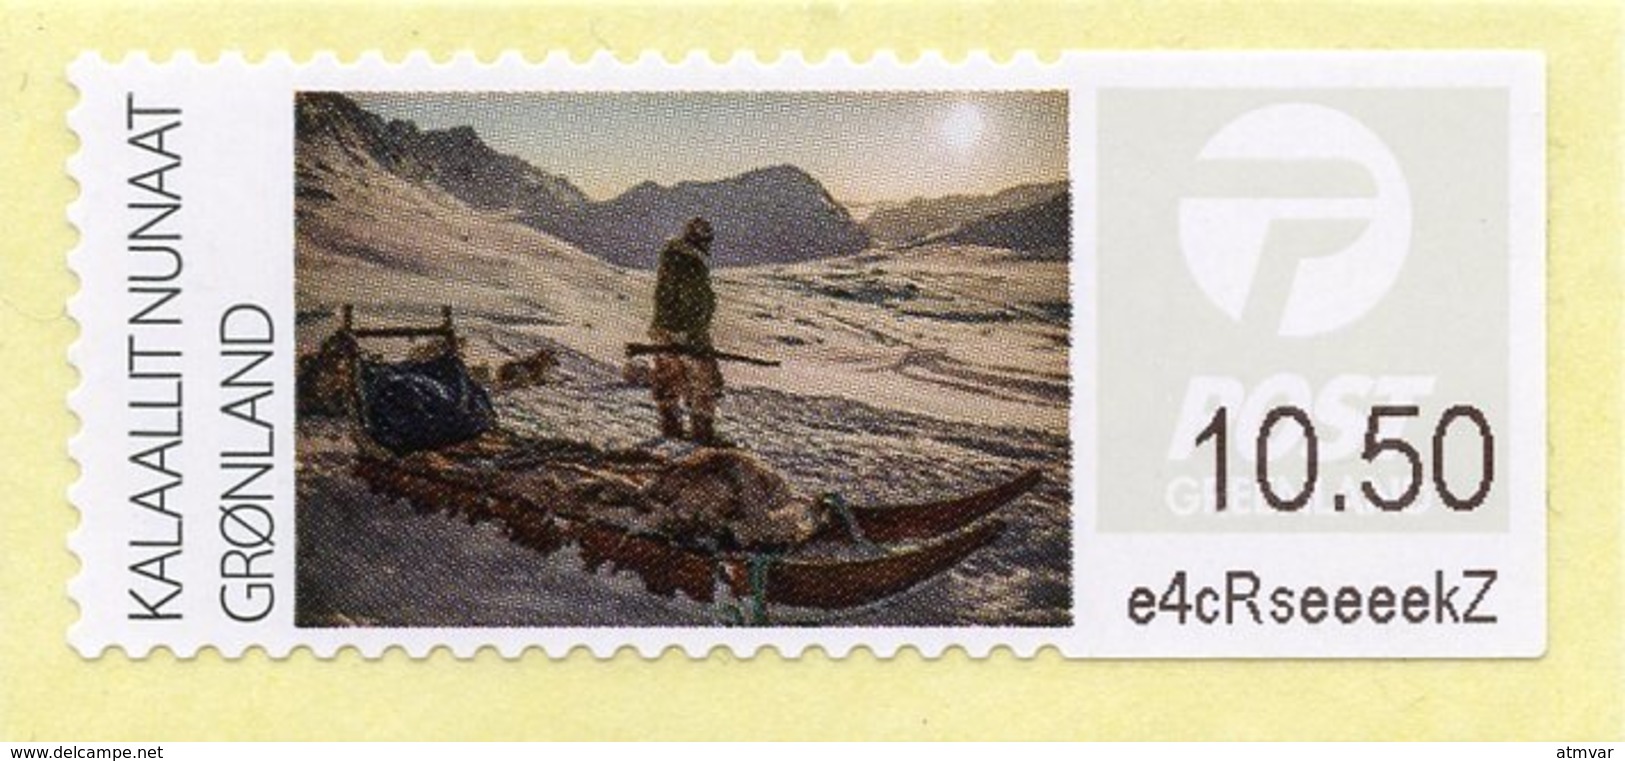 GREENLAND / GROENLAND (2016) - ATM - Greenlandic Scenery - Chasse Polaire, Hunting - Machine Stamps